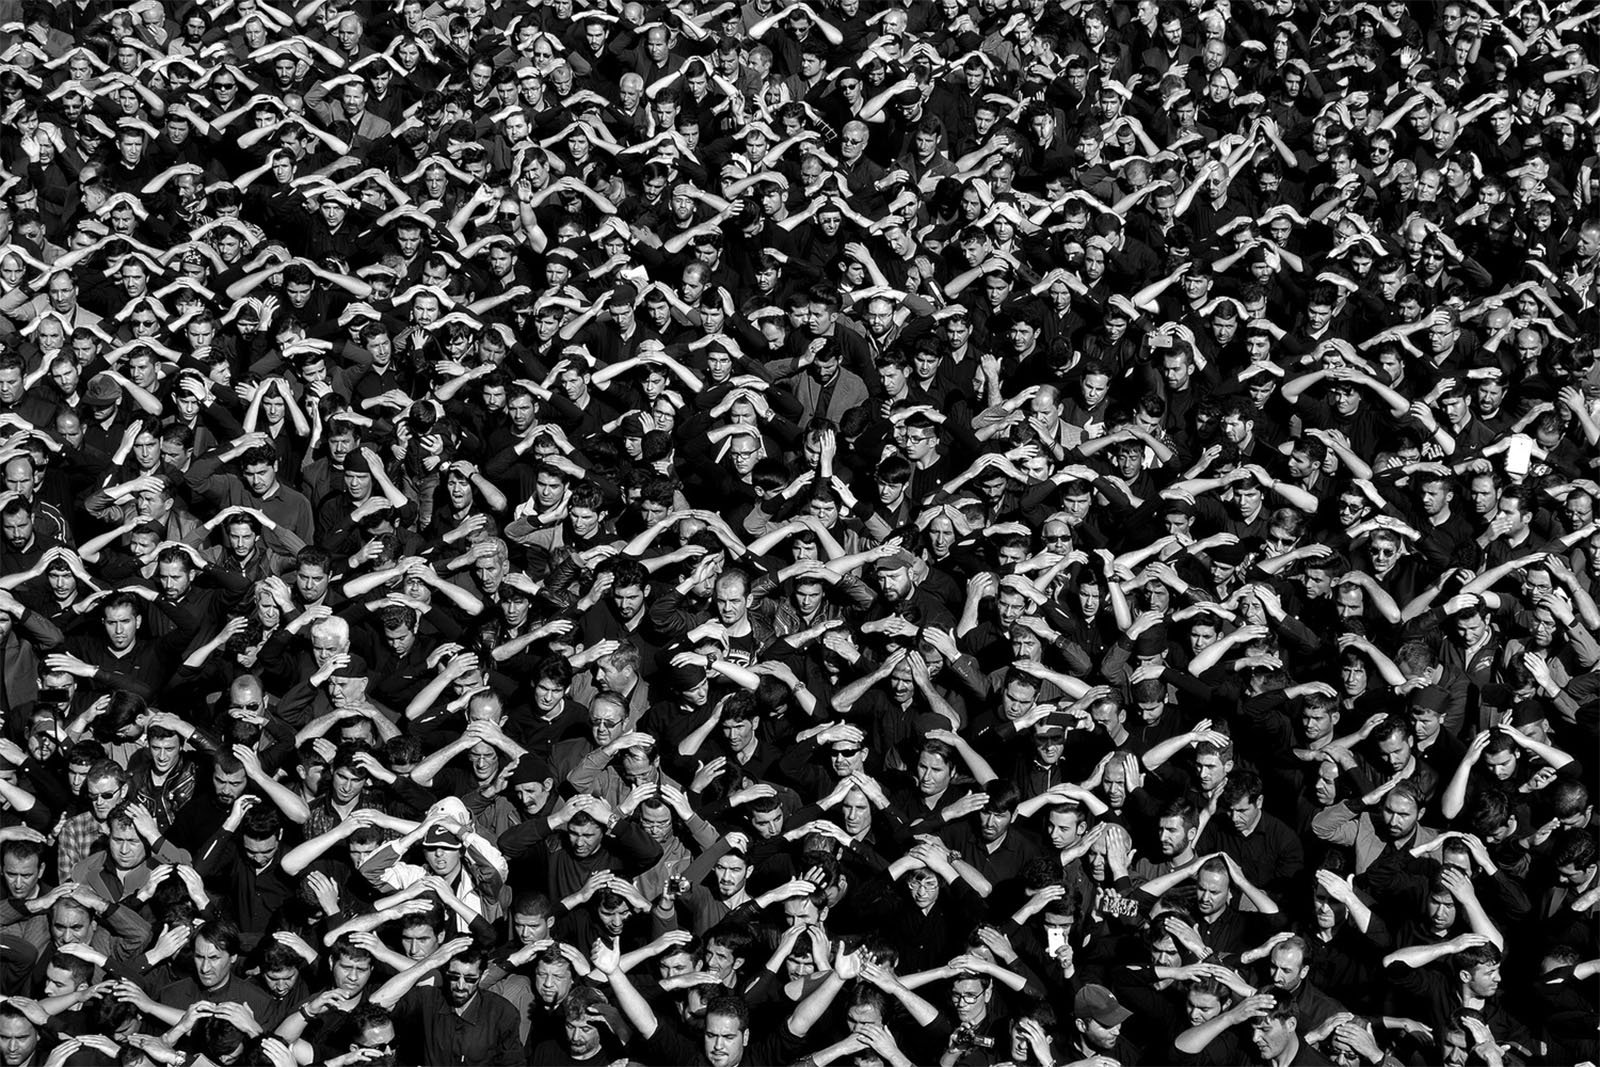 A large crowd of people, mostly dressed in dark clothing, standing close together with their hands raised and arms bent at the elbows in a uniform gesture. The image is in black and white, highlighting the dense and synchronized movement of the group.